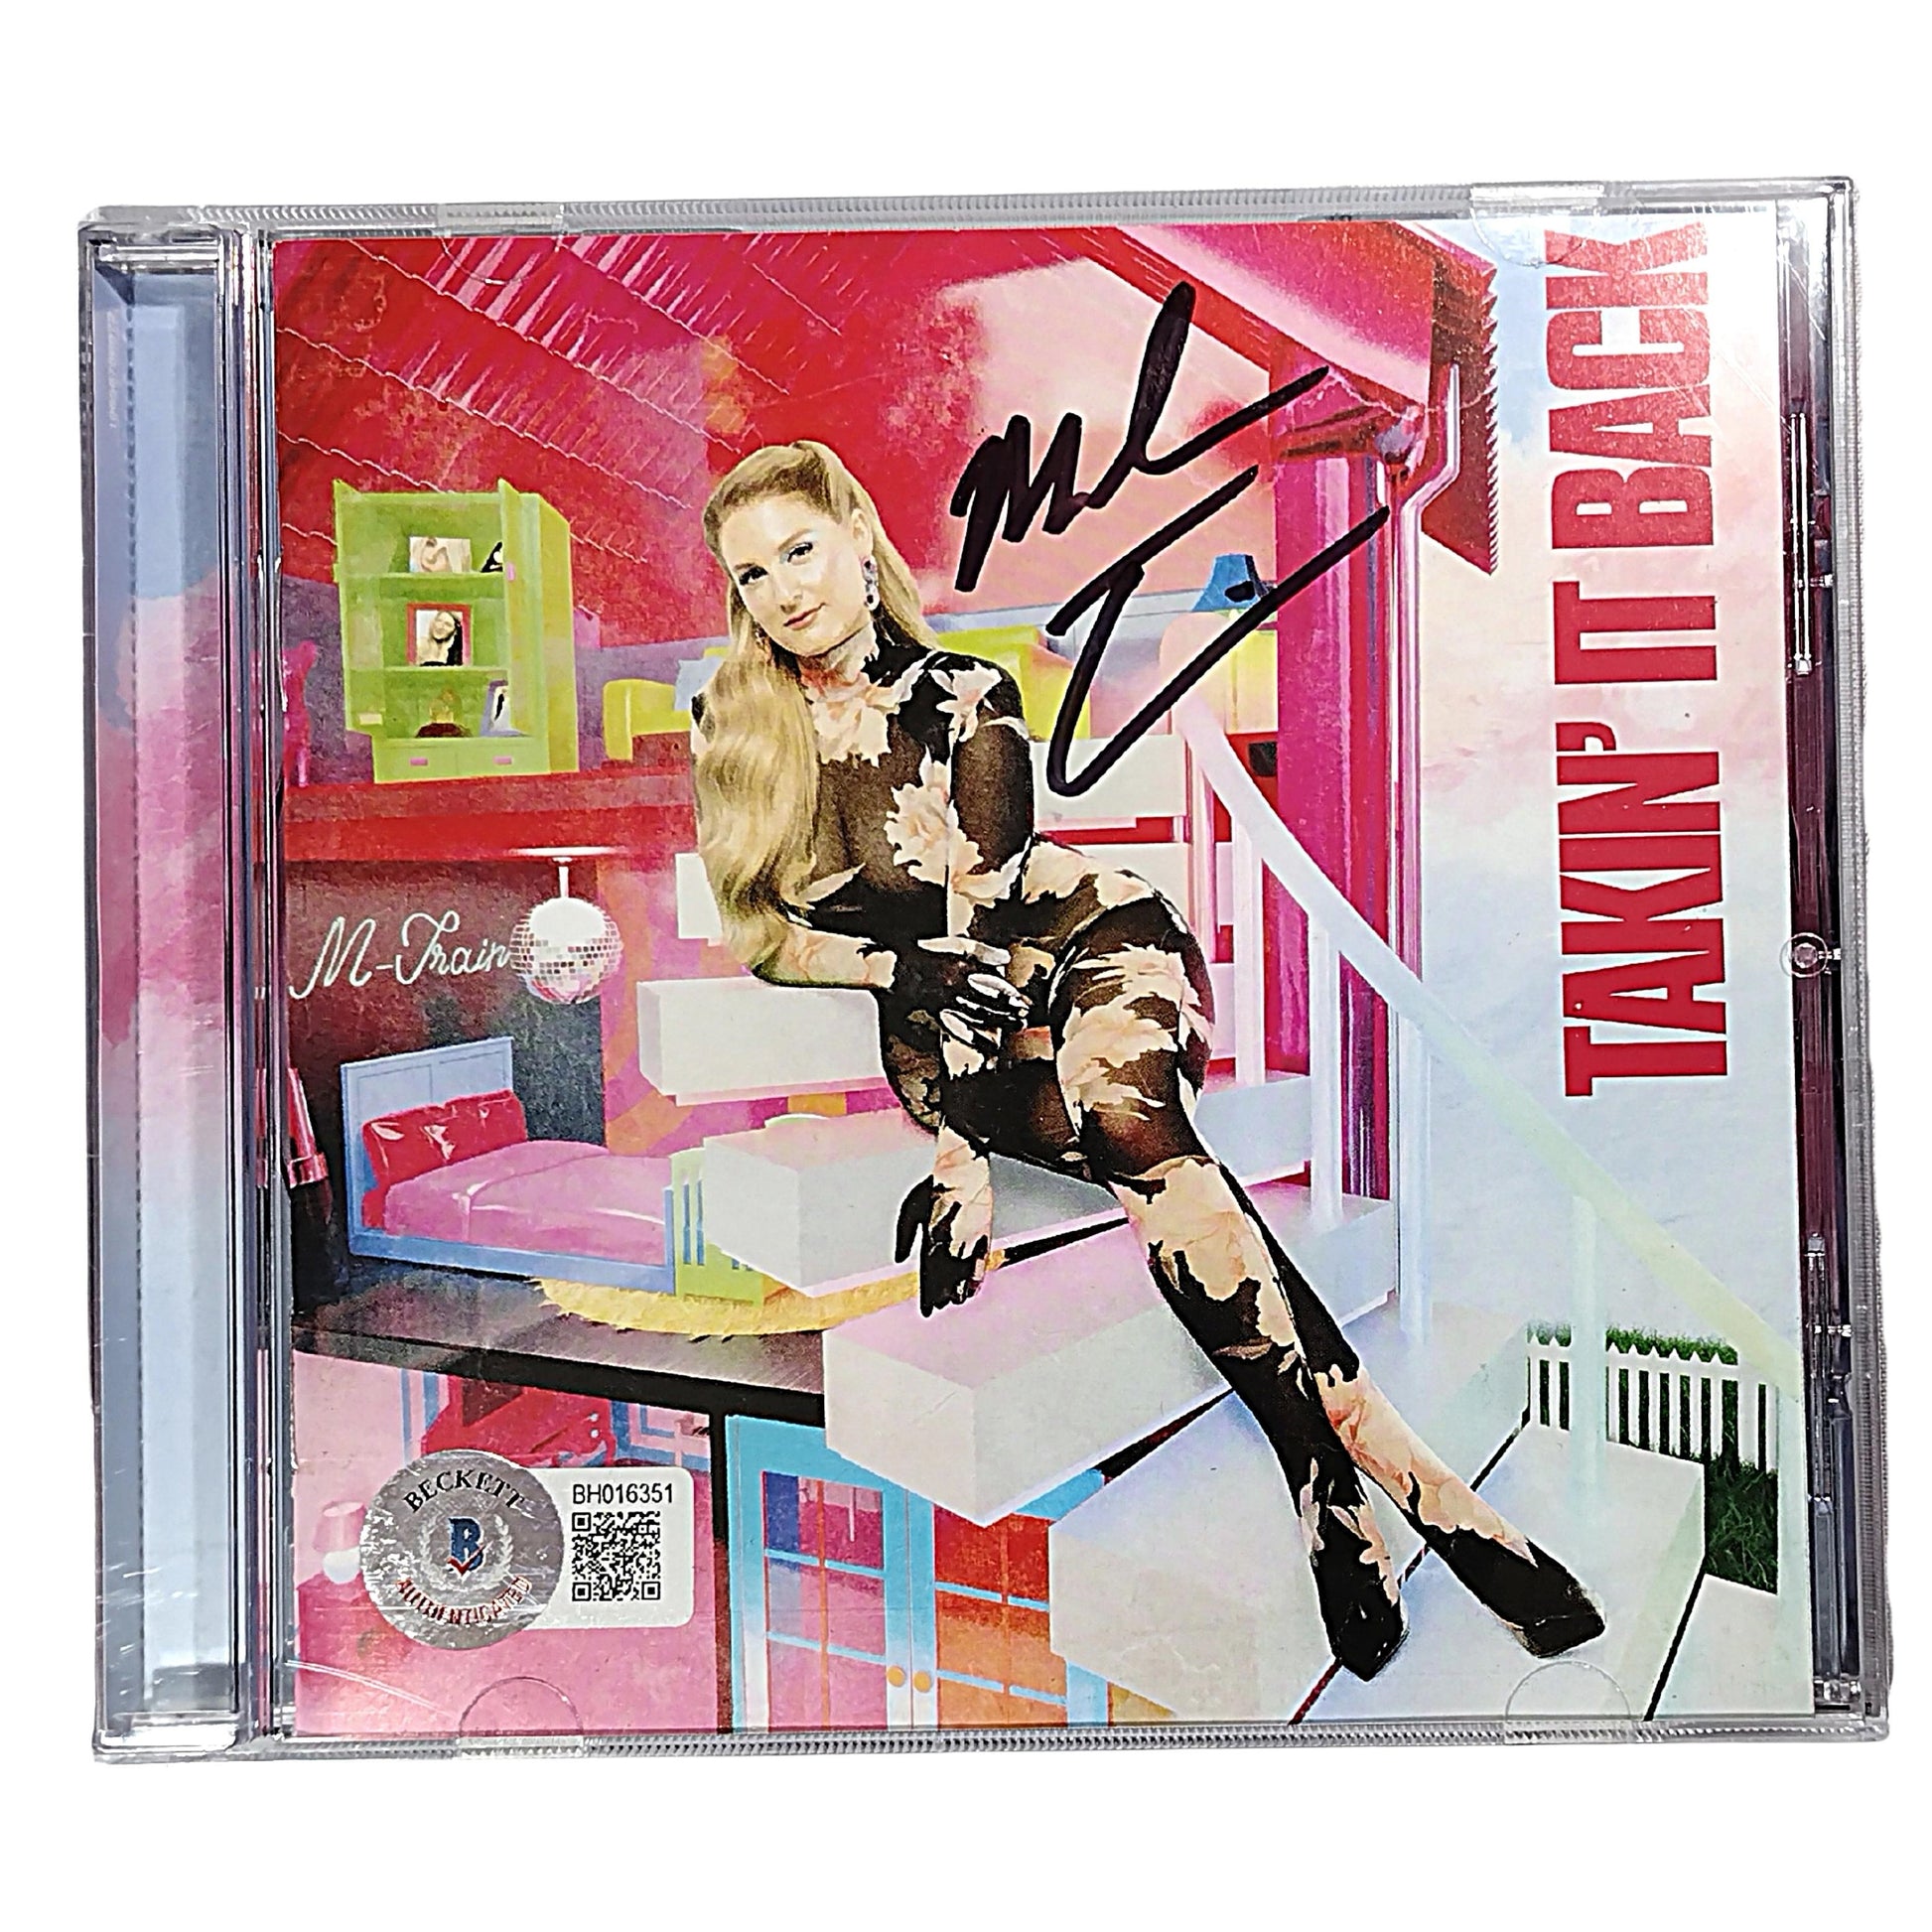 Music- Autographed- Meghan Trainor Signed Takin' It Back Compact Disc CD Cover Beckett Authentication 101